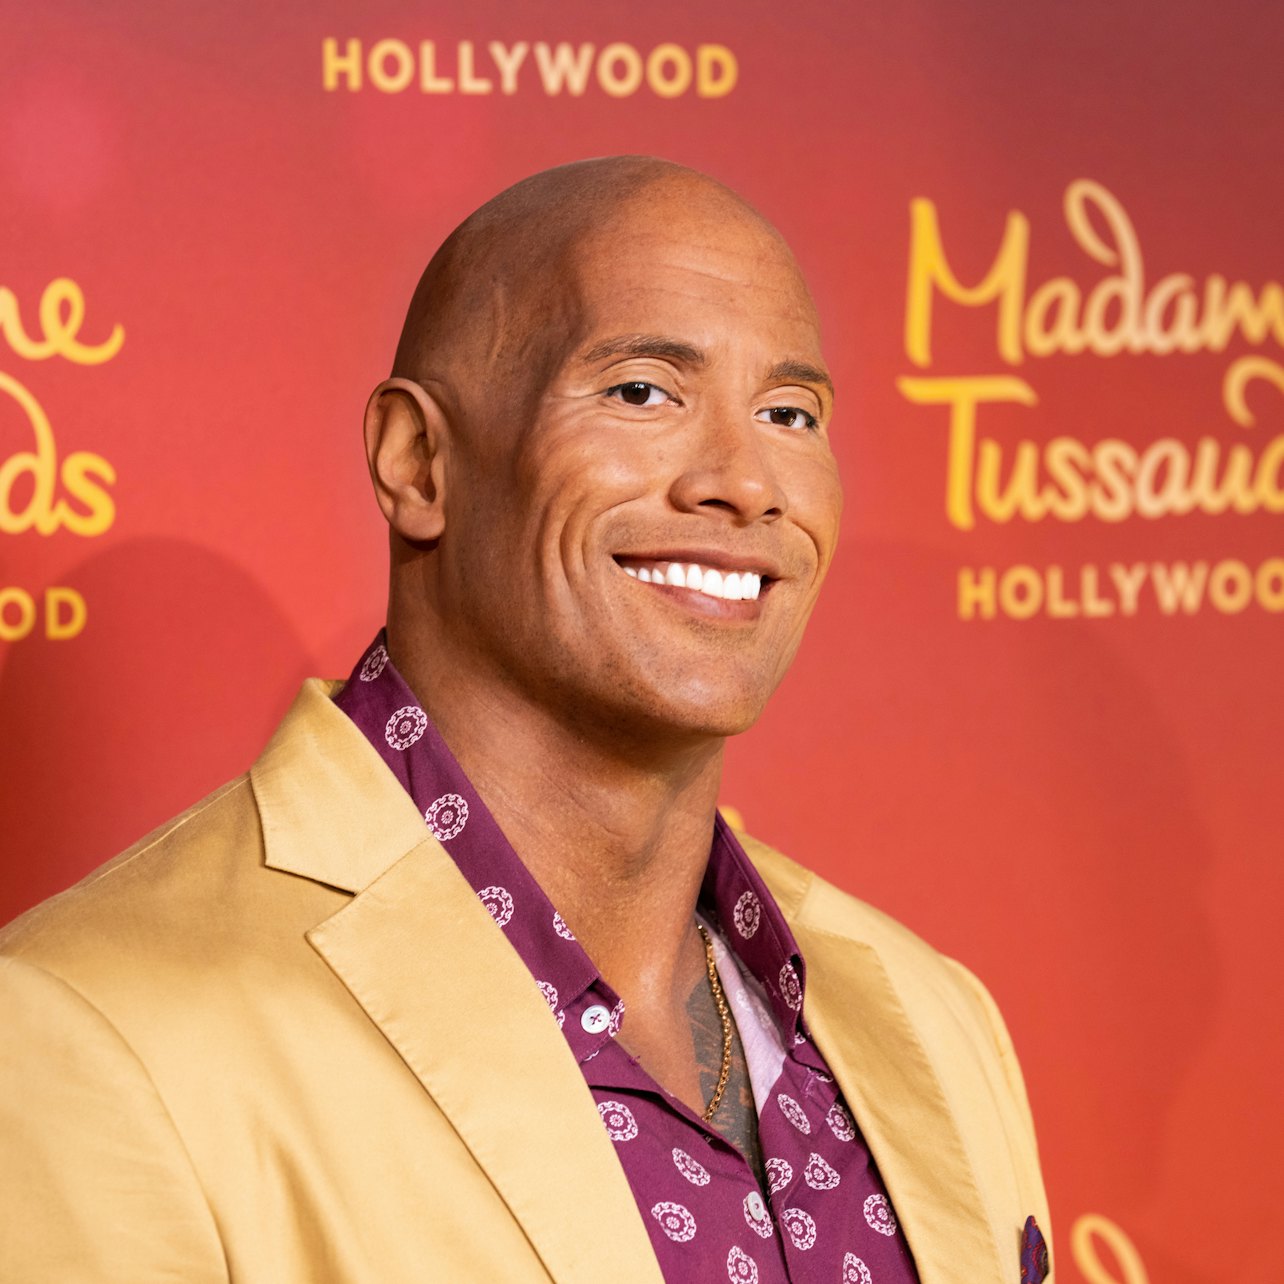 Madame Tussauds Hollywood - Accommodations in Los Angeles